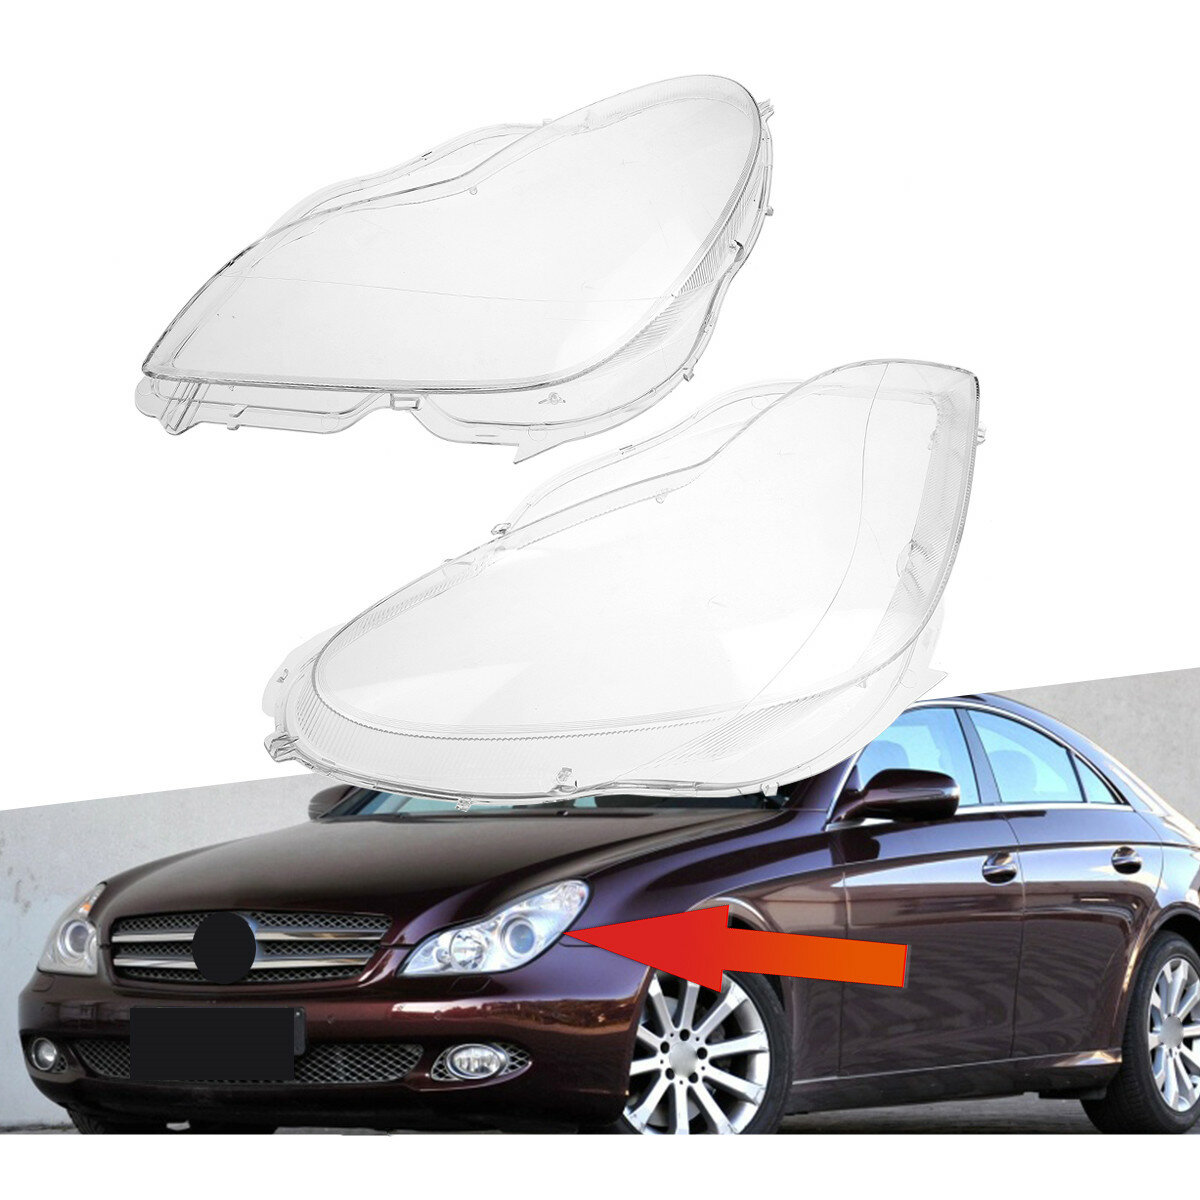 Image of 2Pcs Front Halogen Headlights Lamps Lens Cover Assies Hella For Benz W219 CLS550